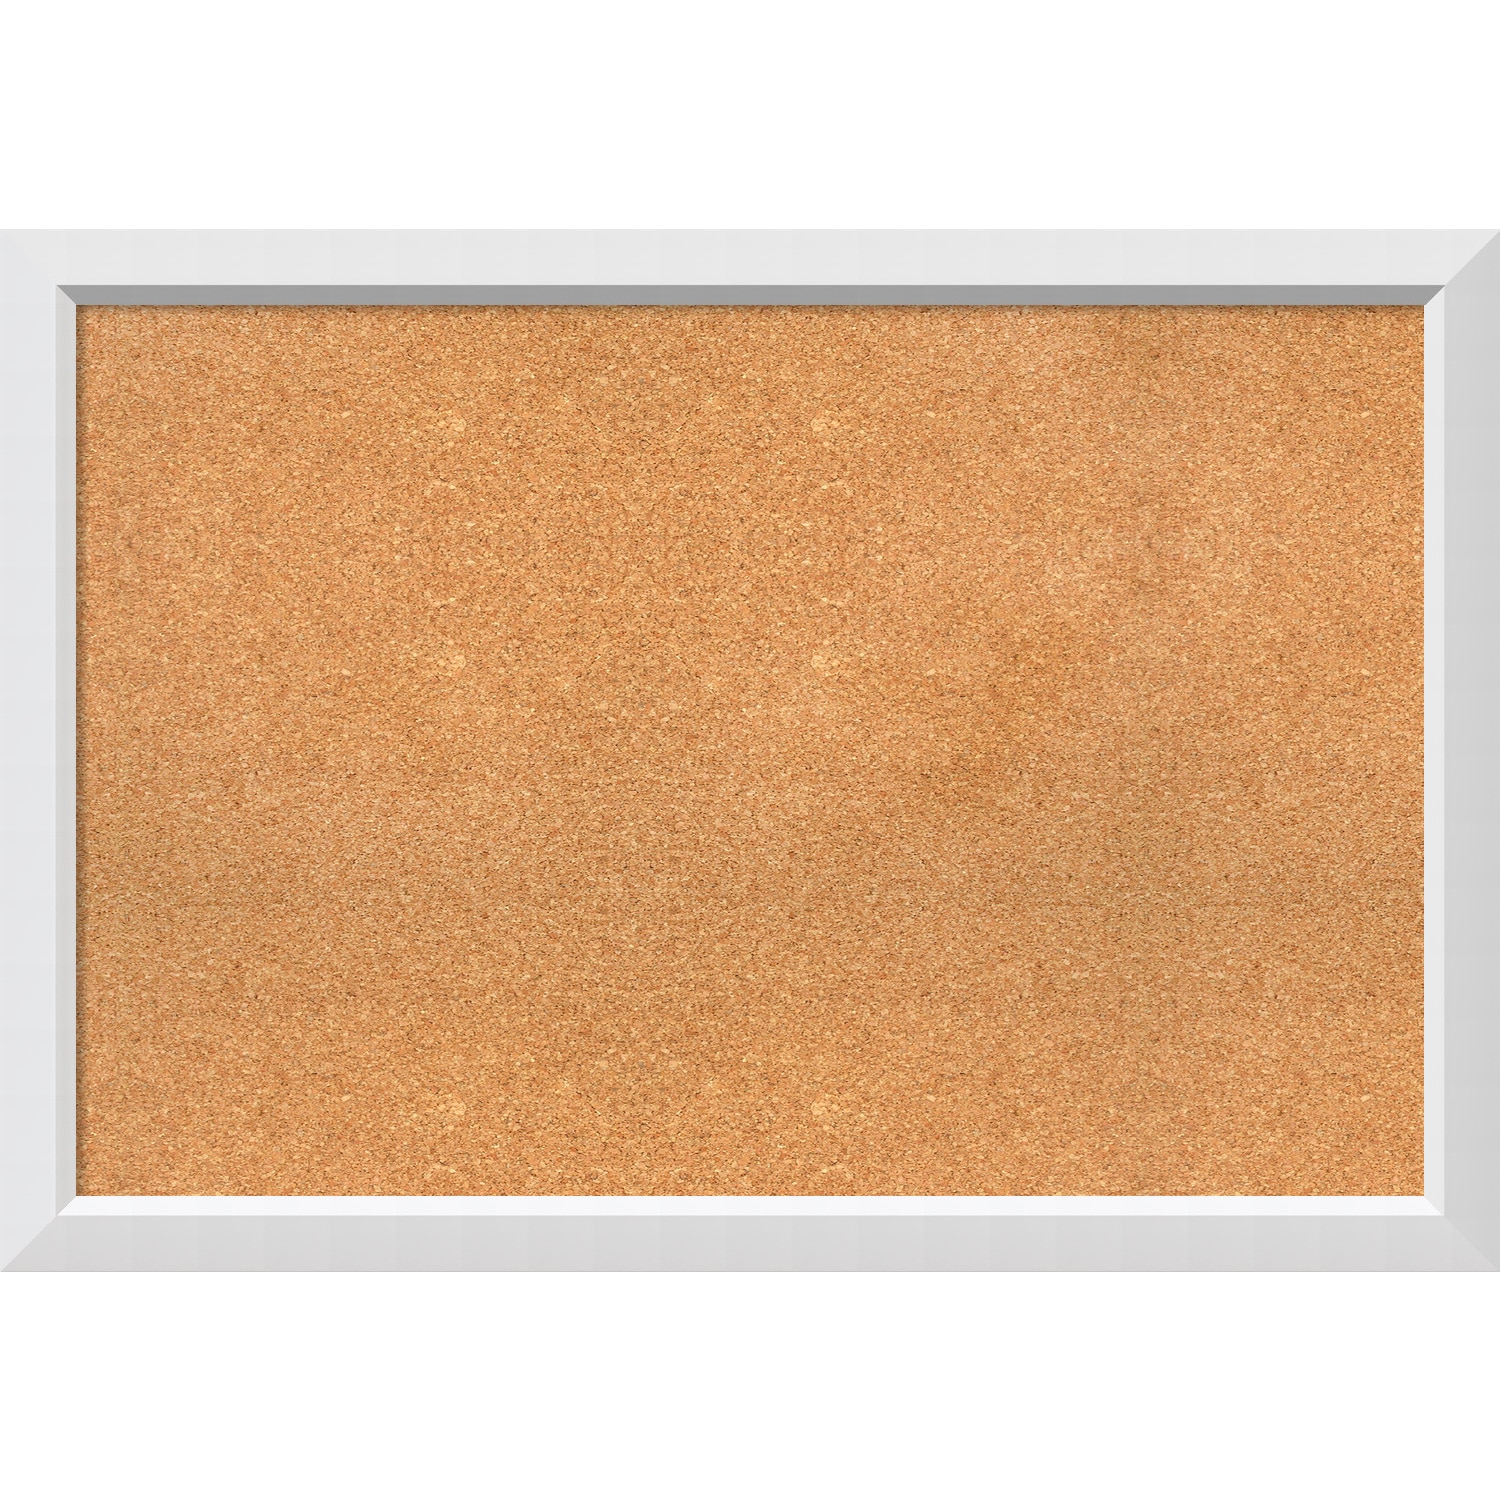 Juvale Cork Tile Boards -Frameless - Mini Wall Bulletin Boards - Natural - 4 Pack - 12 x 12 Inches